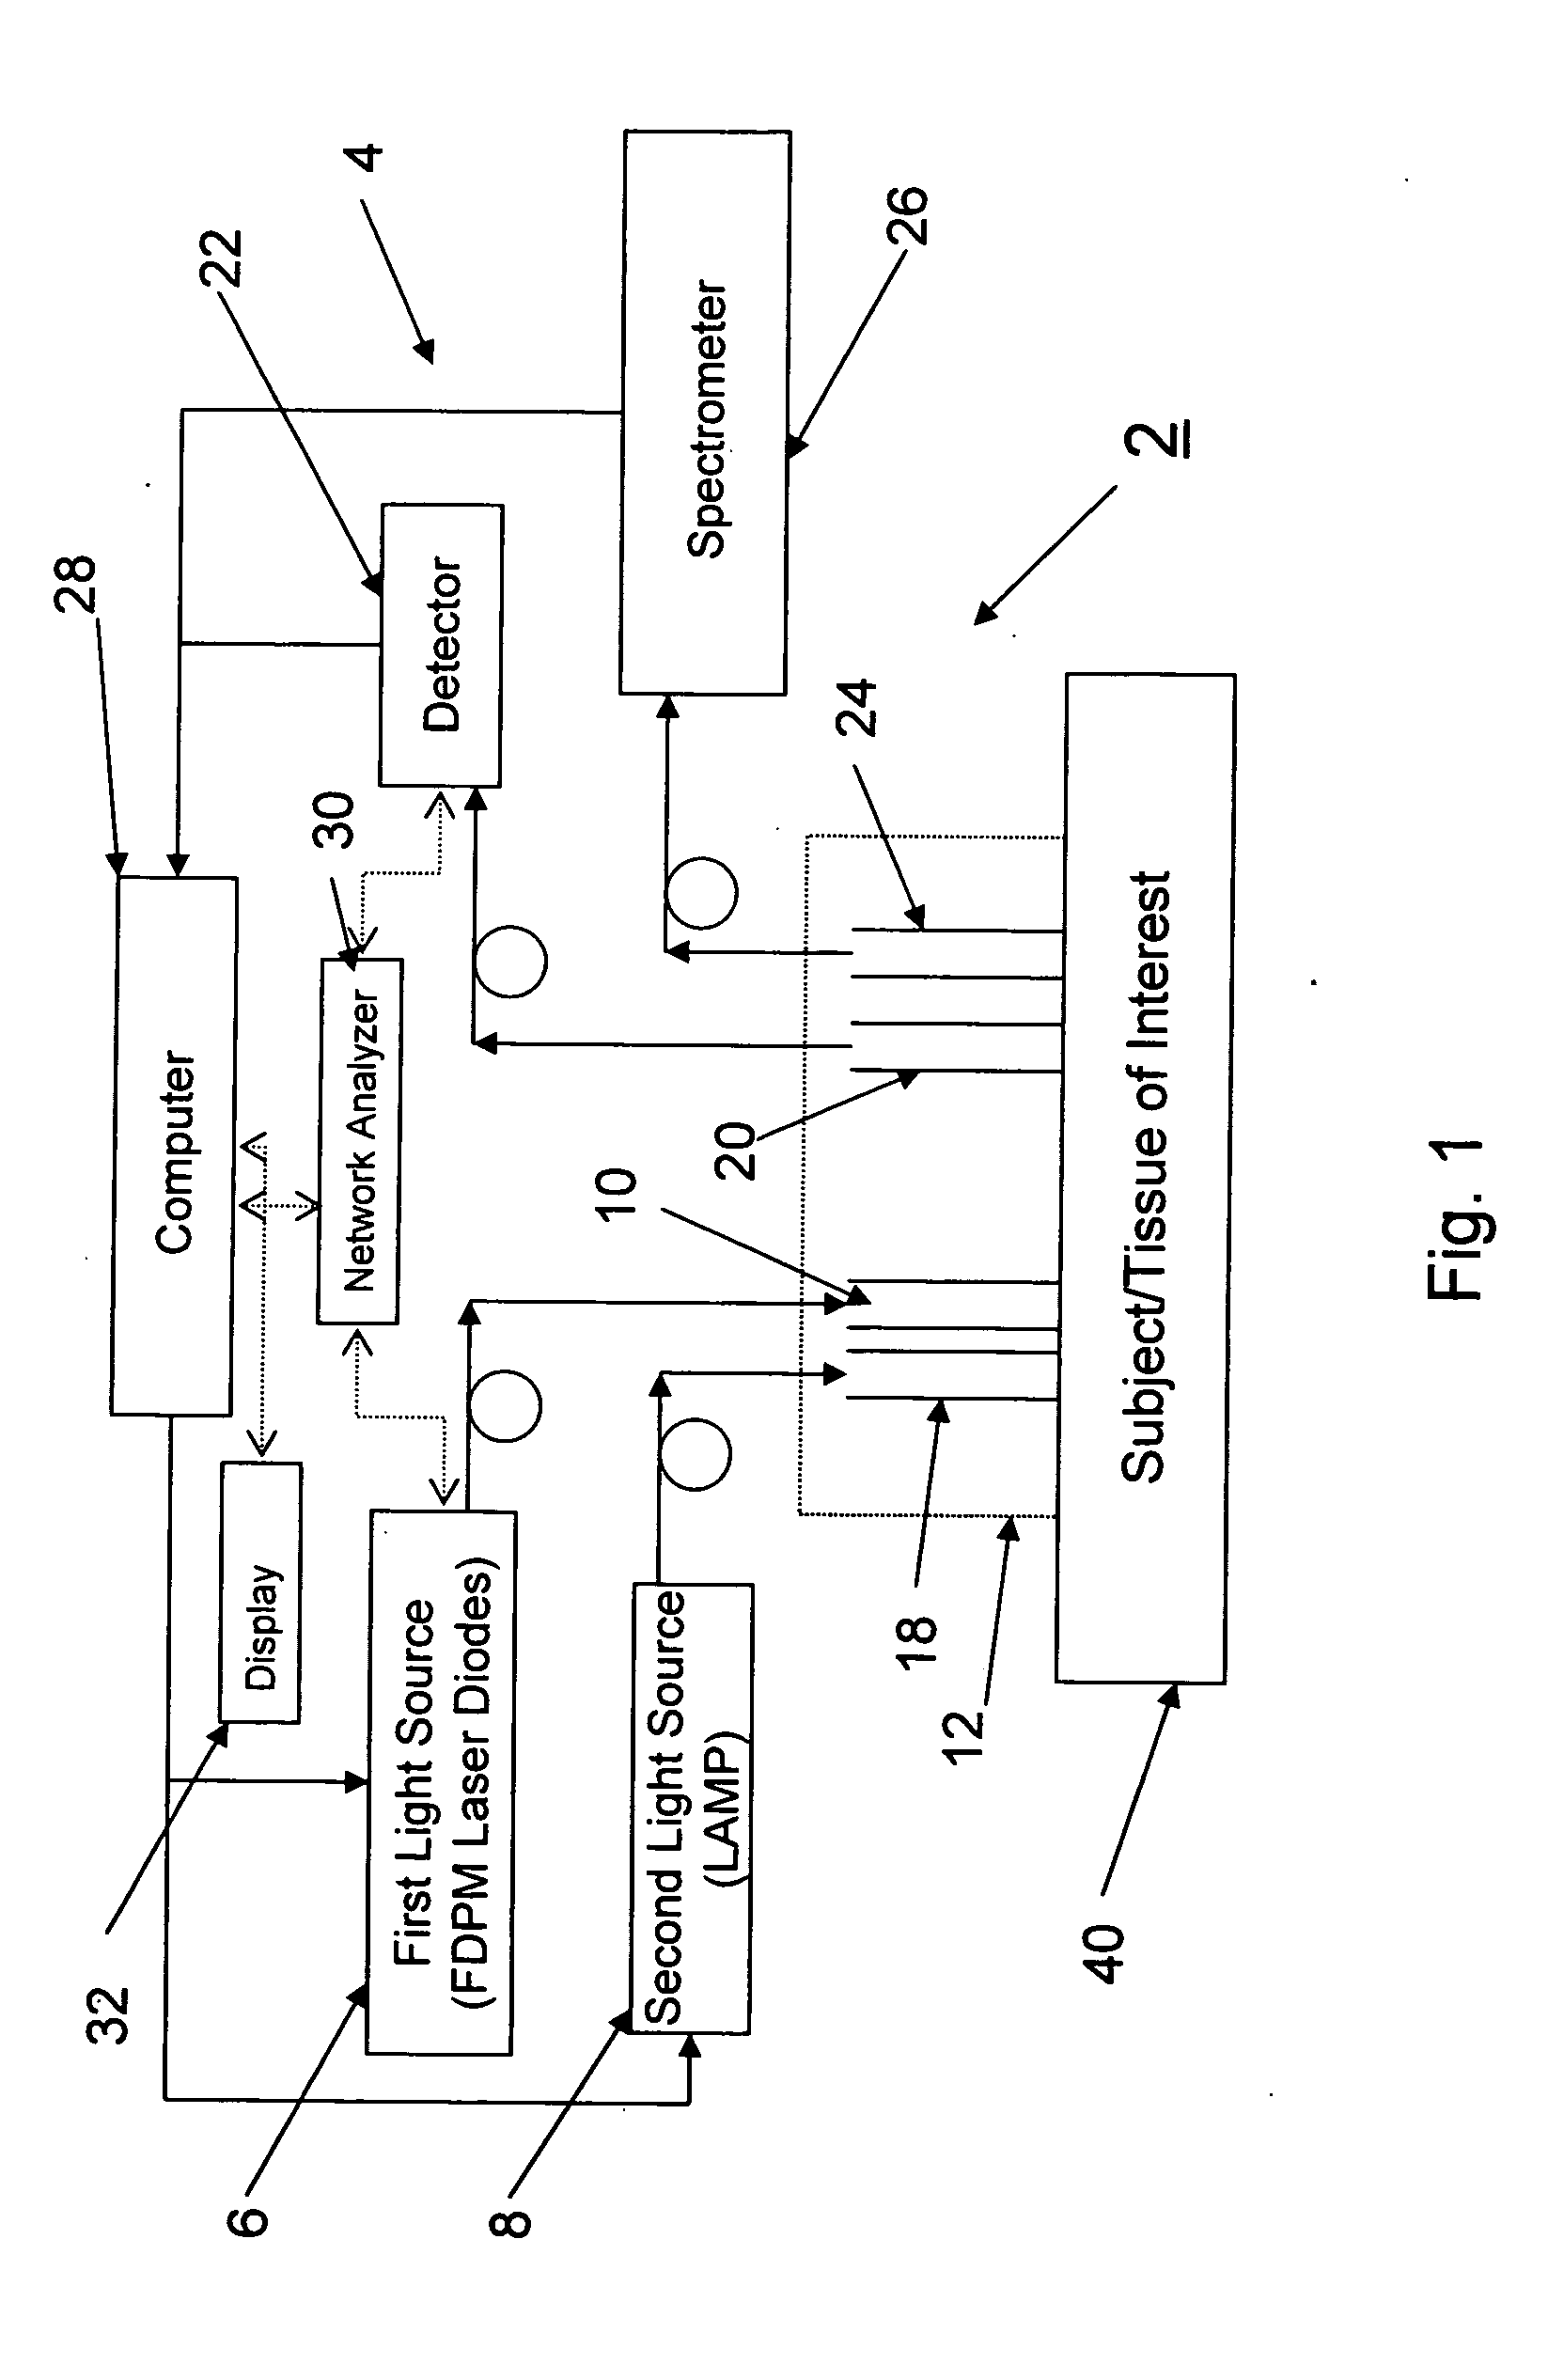 Method and apparatus for dynamically monitoring multiple in vivo tissue chromophores